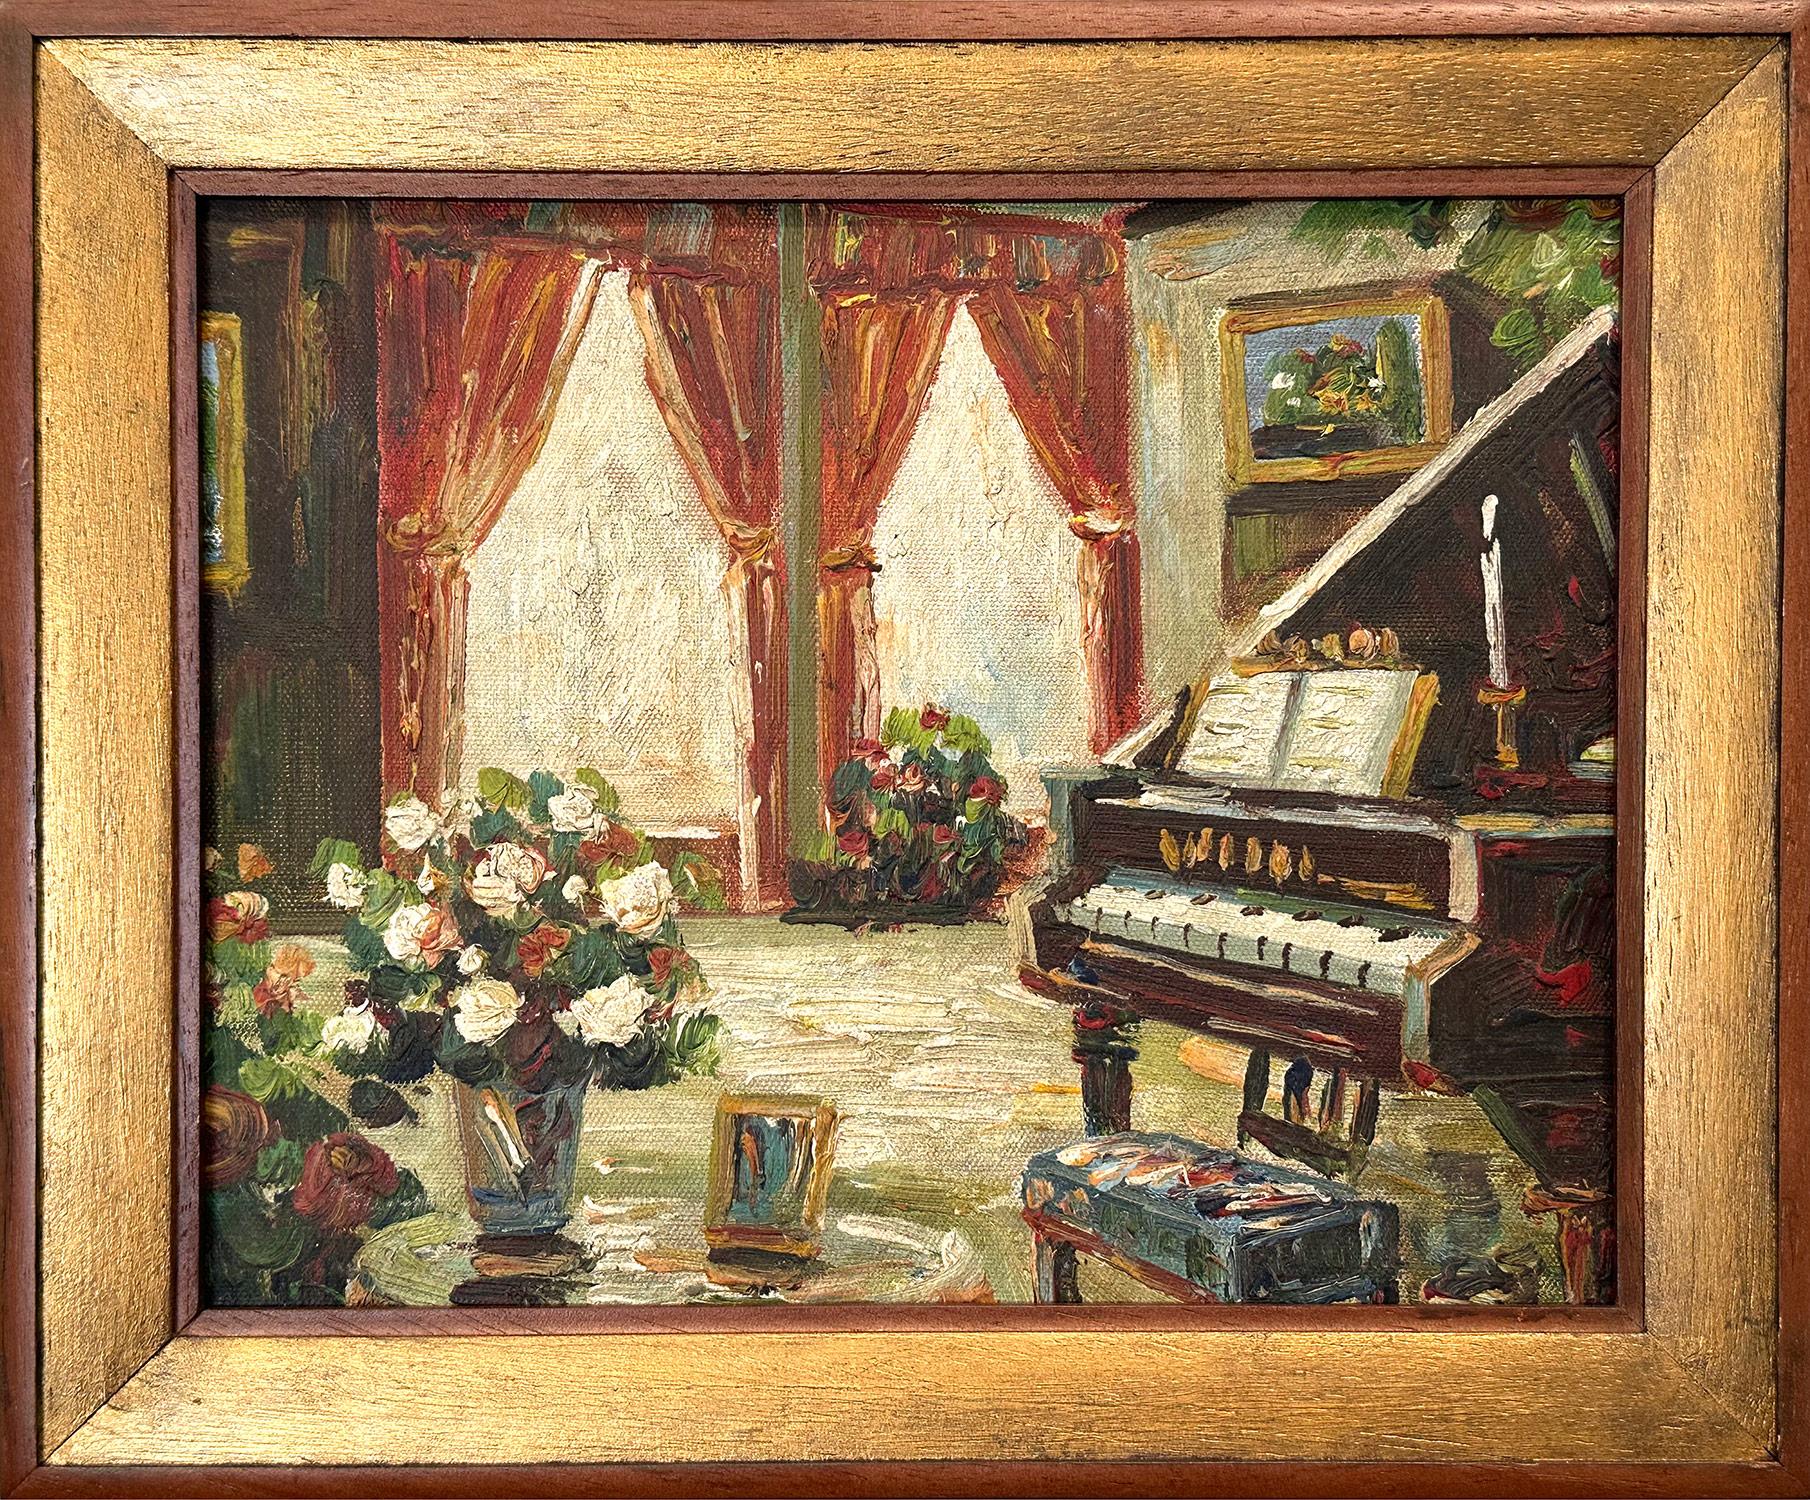 Unknown Interior Painting - "Piano & Flowers" Parisian Impressionistic Oil Painting & Baby Grand Piano